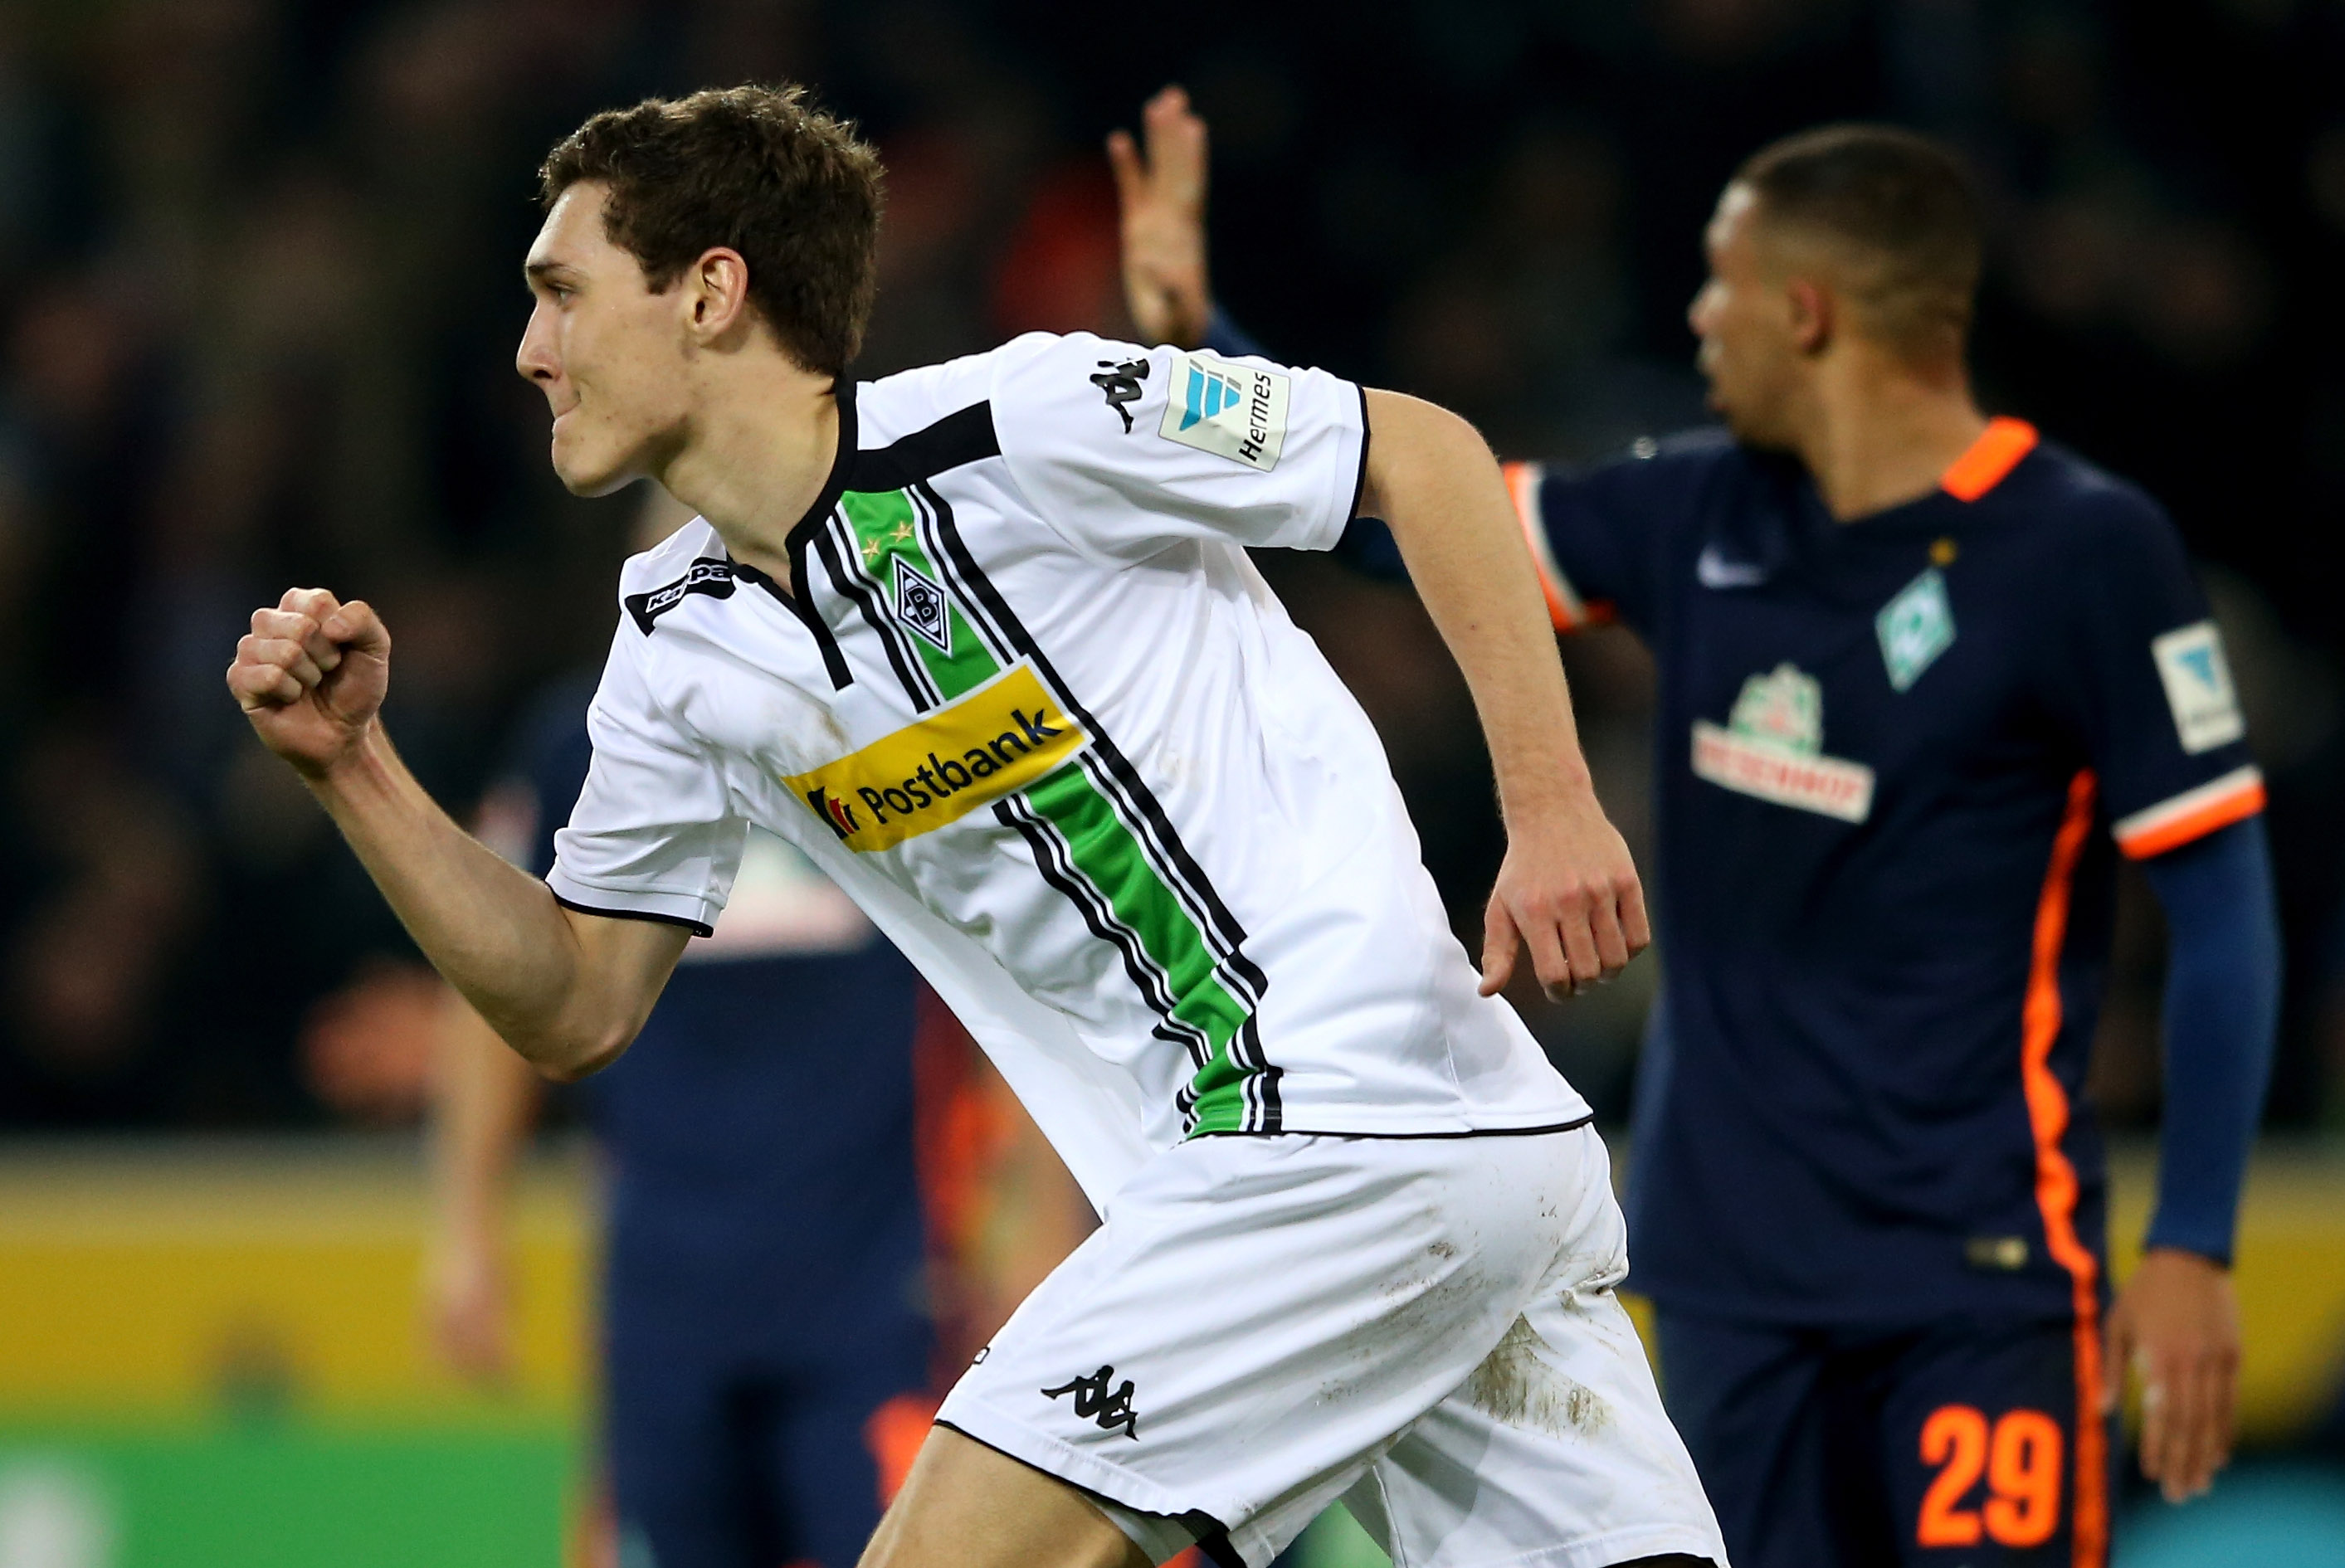 MOENCHENGLADBACH, GERMANY - FEBRUARY 05:  Andreas Christensen of Moenchengladbach celebrates with team mates after scoring his teams second goal during the Bundesliga match between Borussia Moenchengladbach and Werder Bremen at Borussia-Park on February 5, 2016 in Moenchengladbach, Germany.  (Photo by Lars Baron/Bongarts/Getty Images)